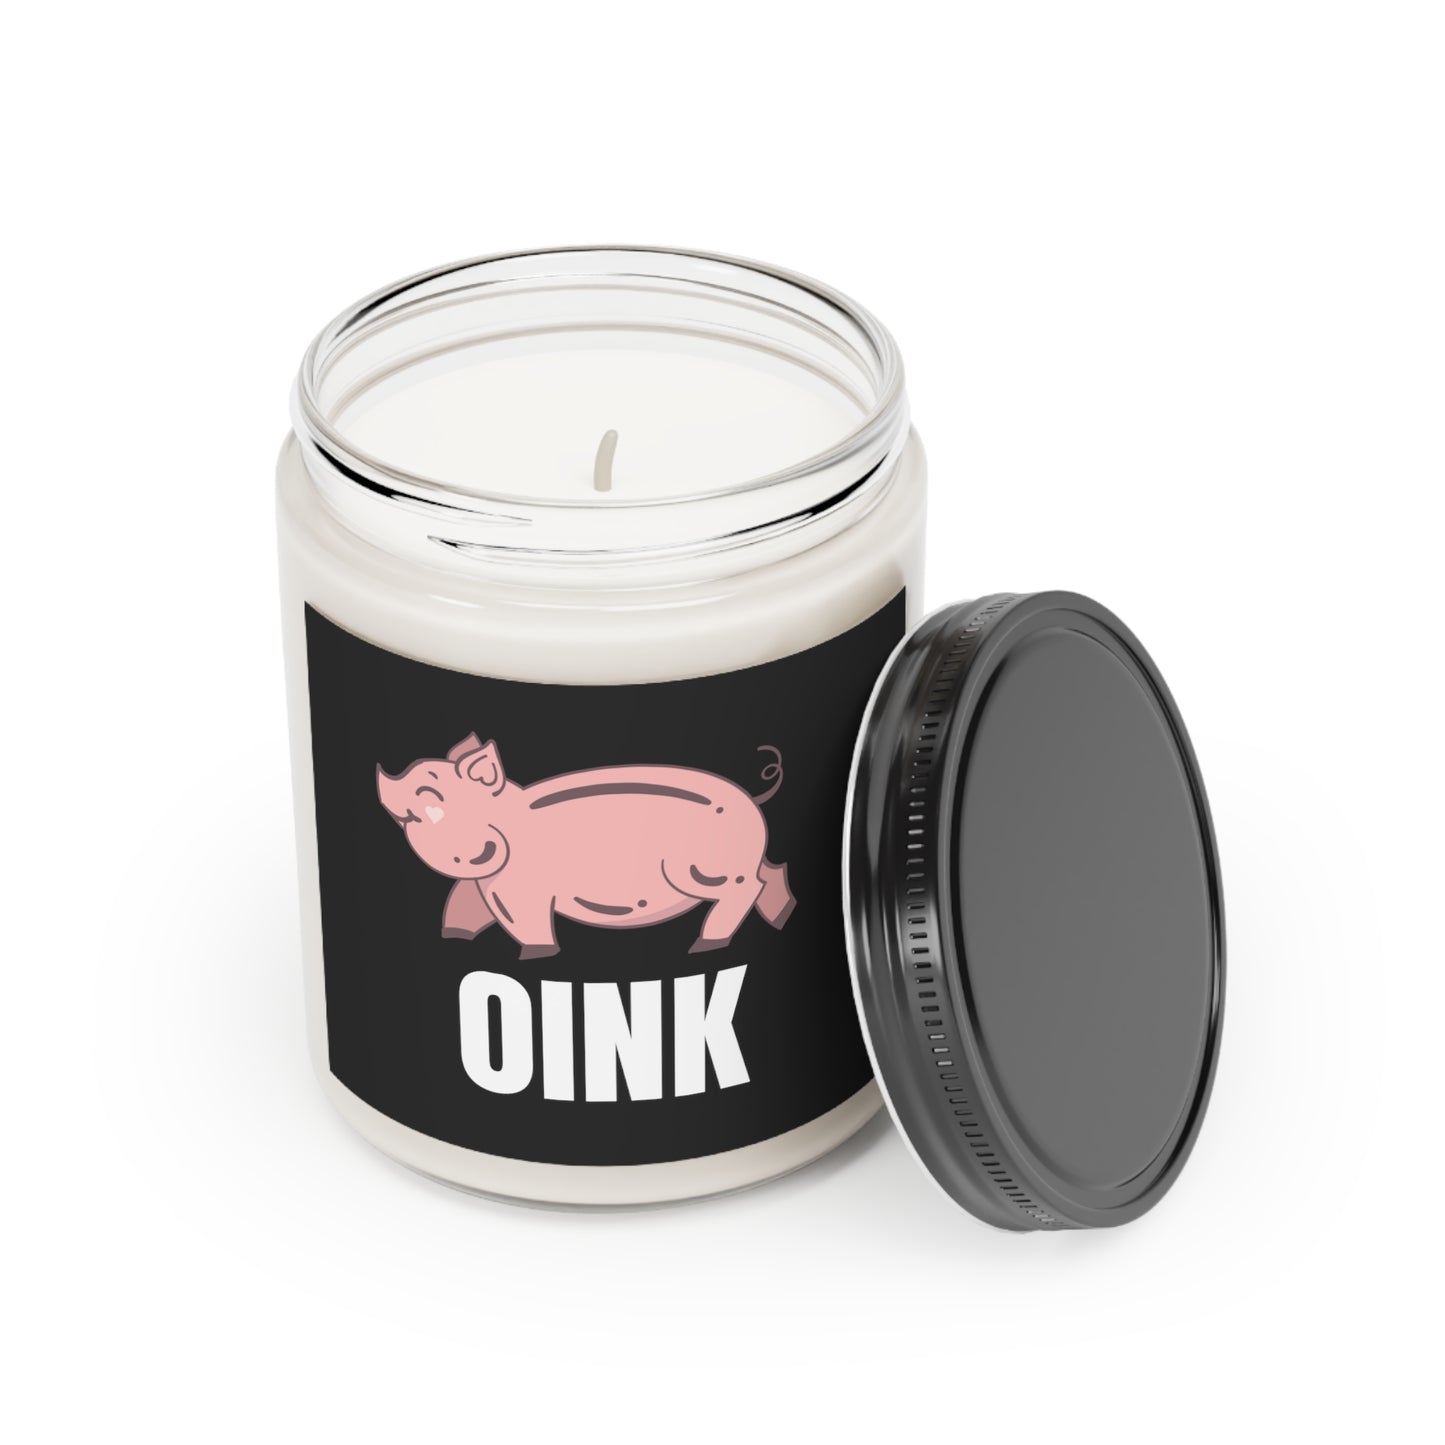 OINK Piggy Candle